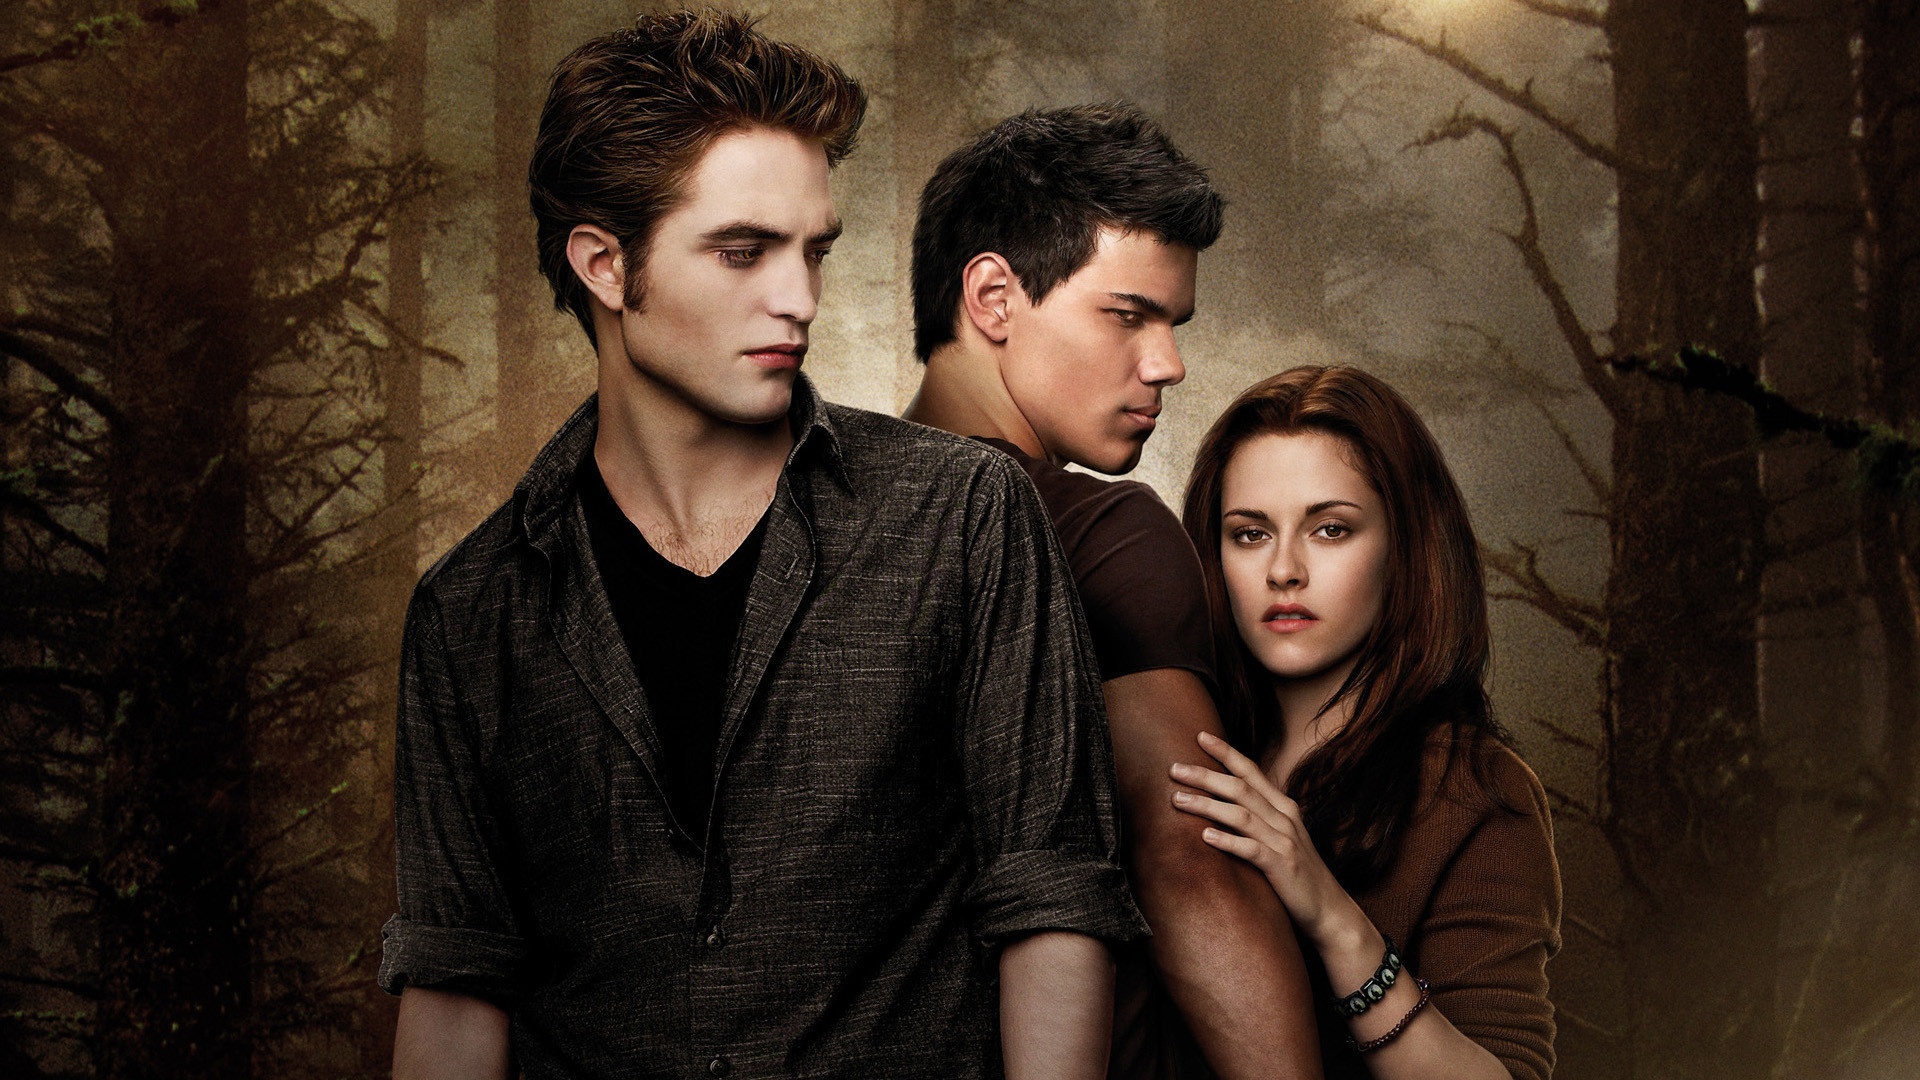 The Twilight New Moon Movie Wallpapers HD Backgrounds